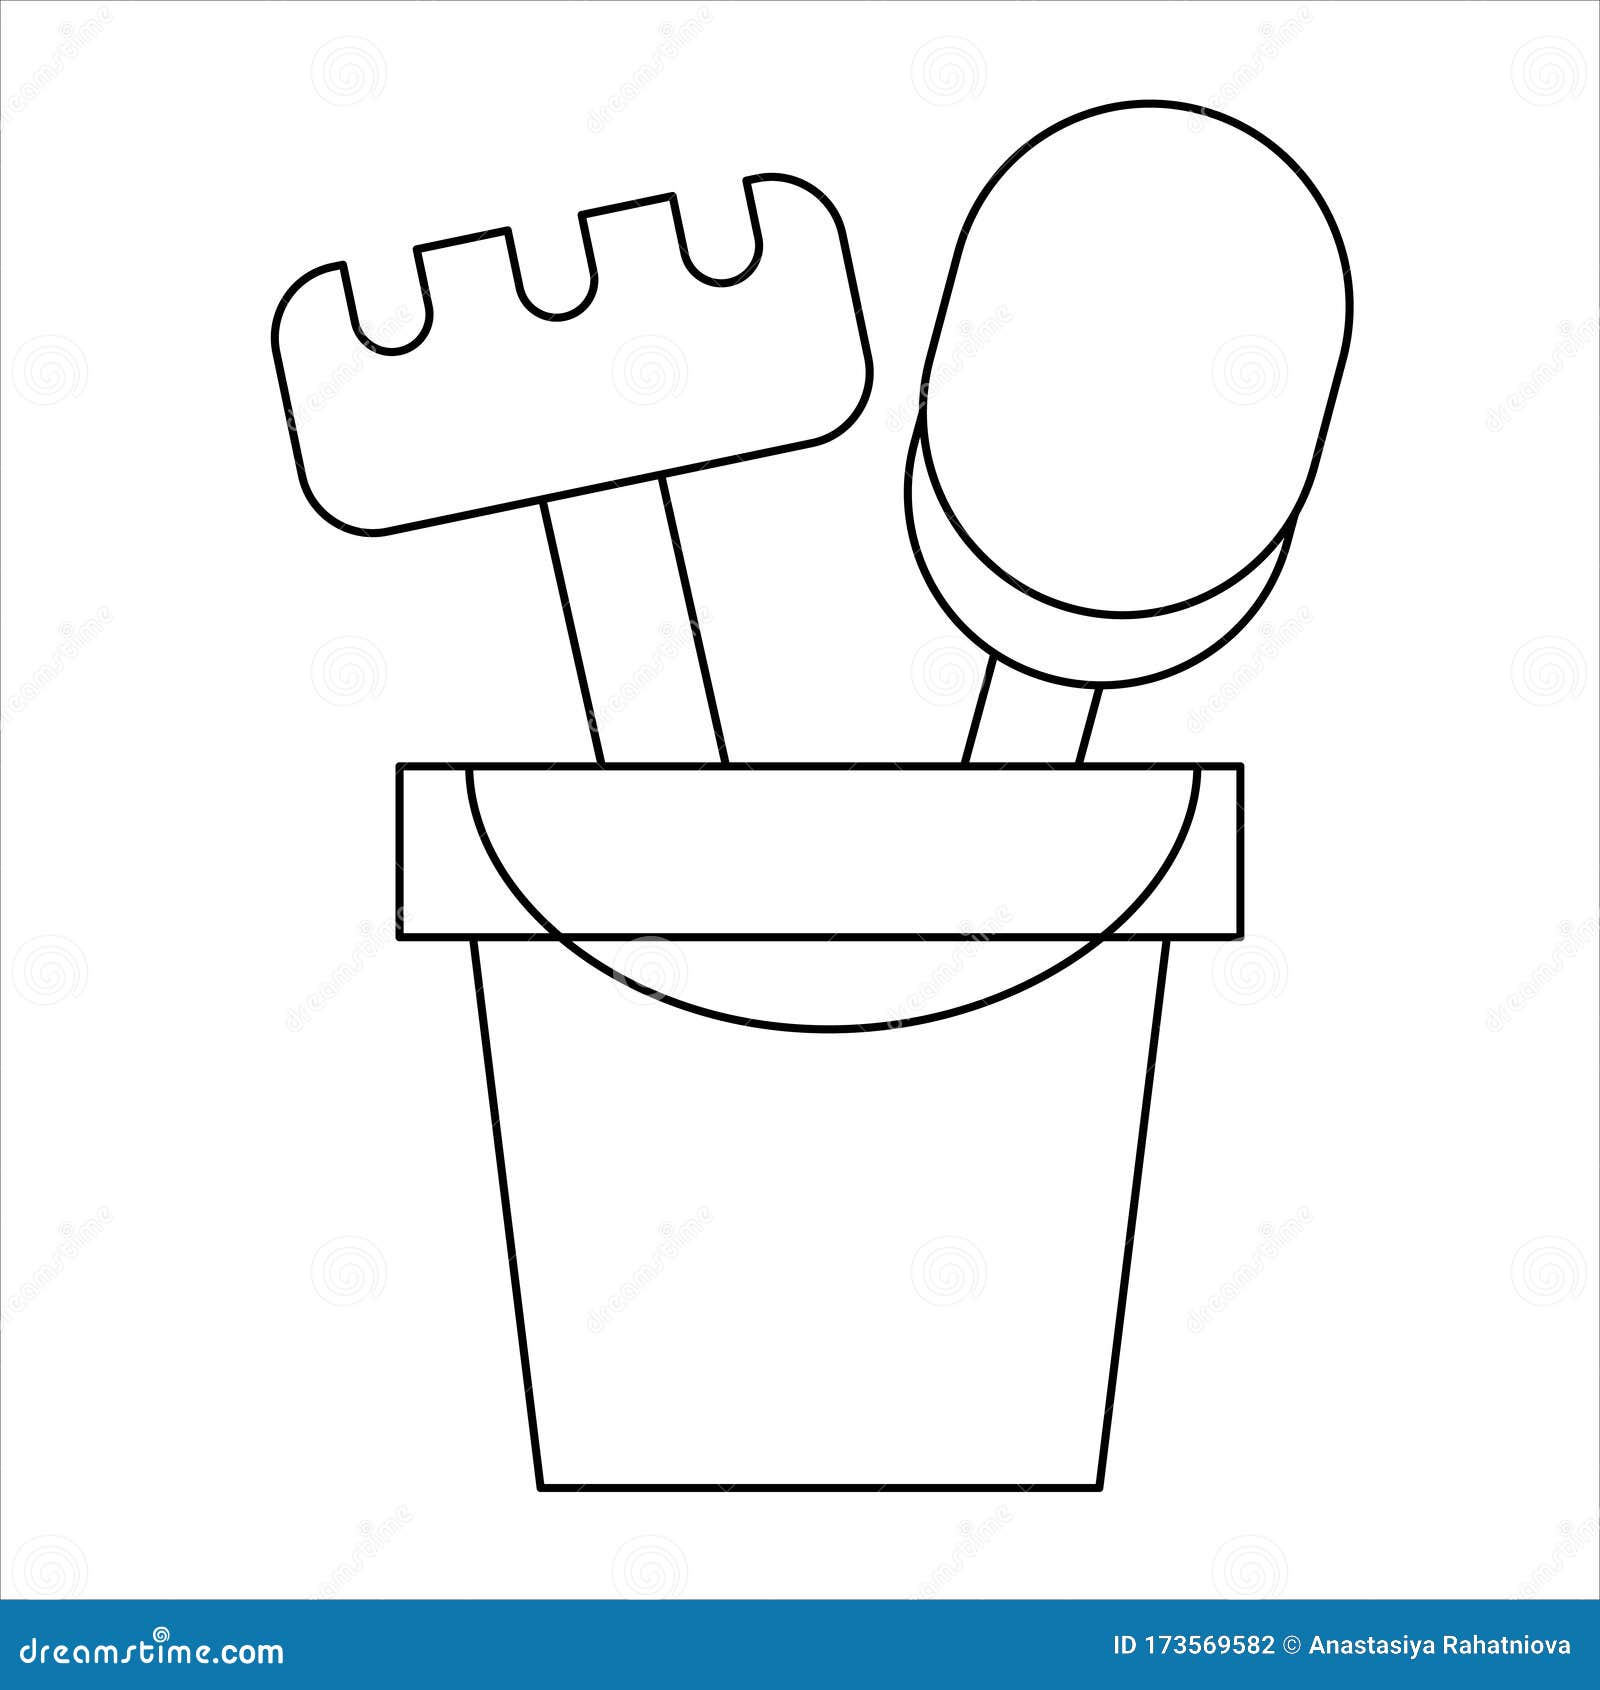 Coloring page outline of shovel and rake in a bucket toy vector illustration stock vector